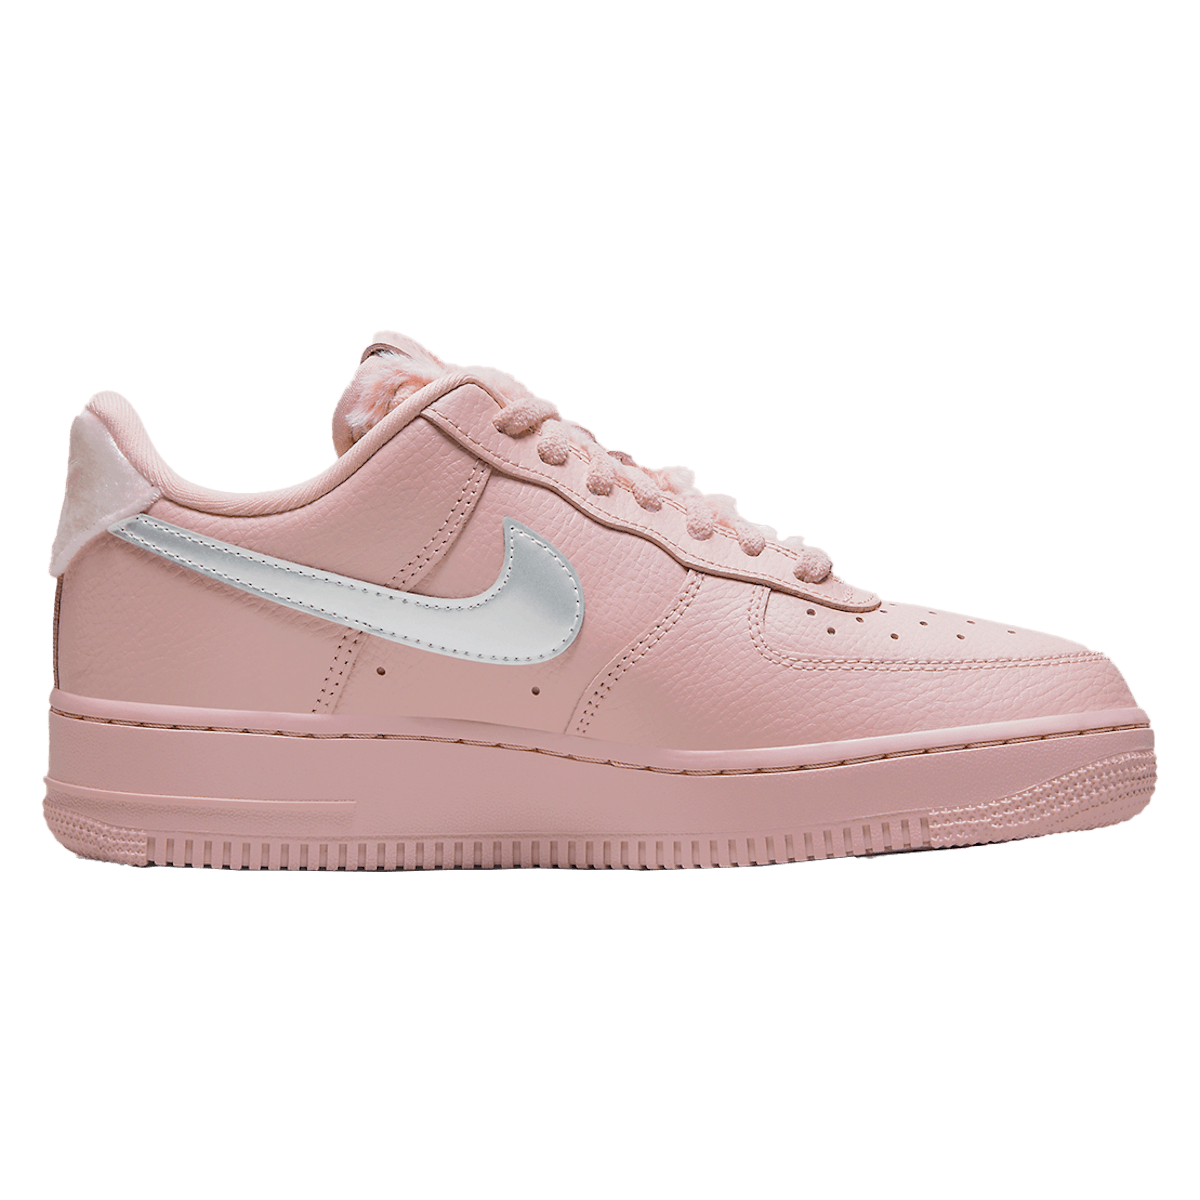 Nike Air Force 1 Low WMNS "Pink Fur"